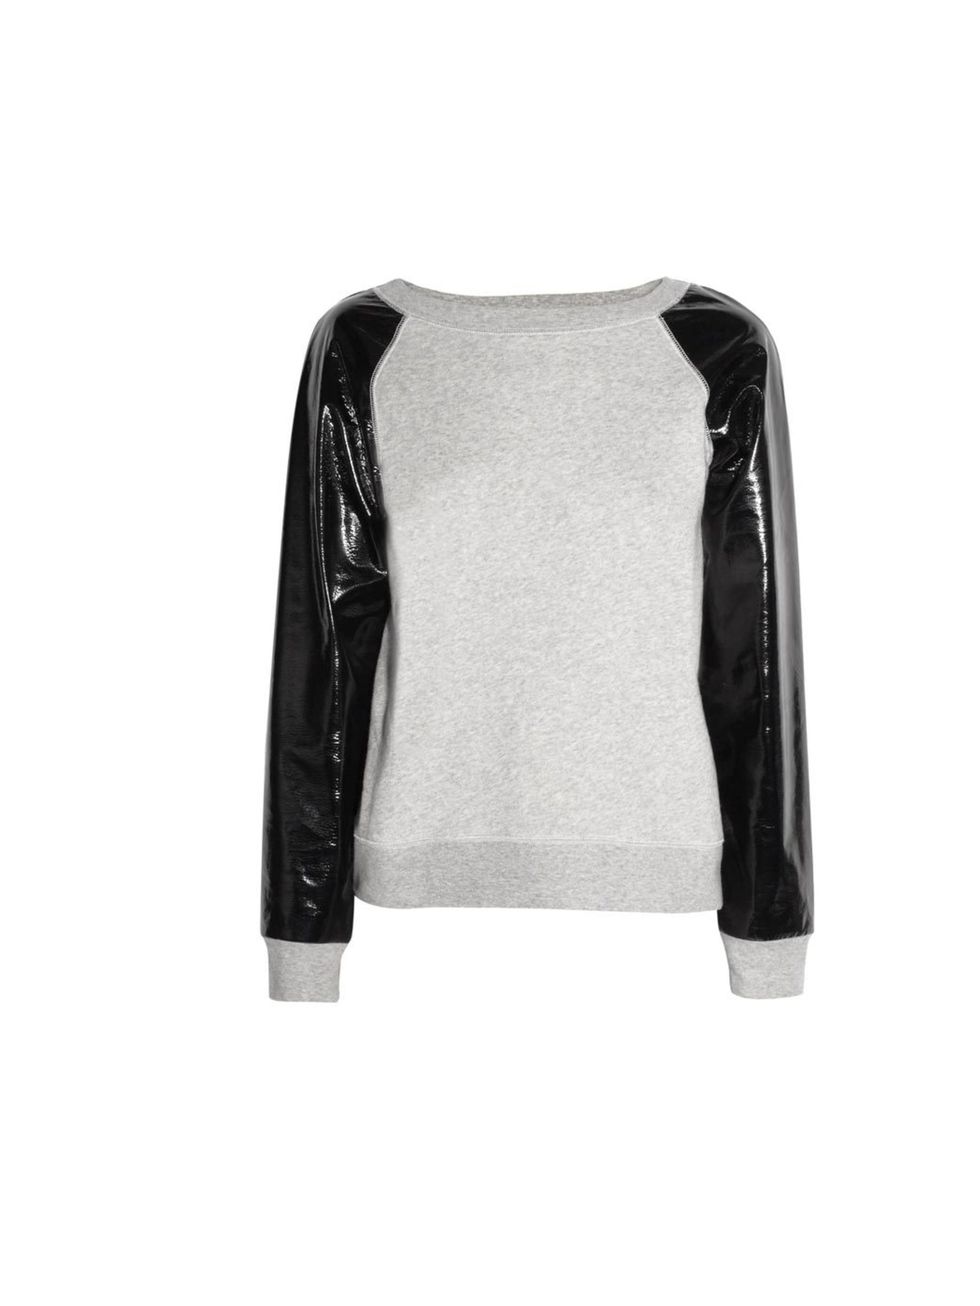 <p>Karl PVC and jersey sweater, £115, at <a href="http://www.net-a-porter.com/product/311322">Net-a-Porter </a></p>